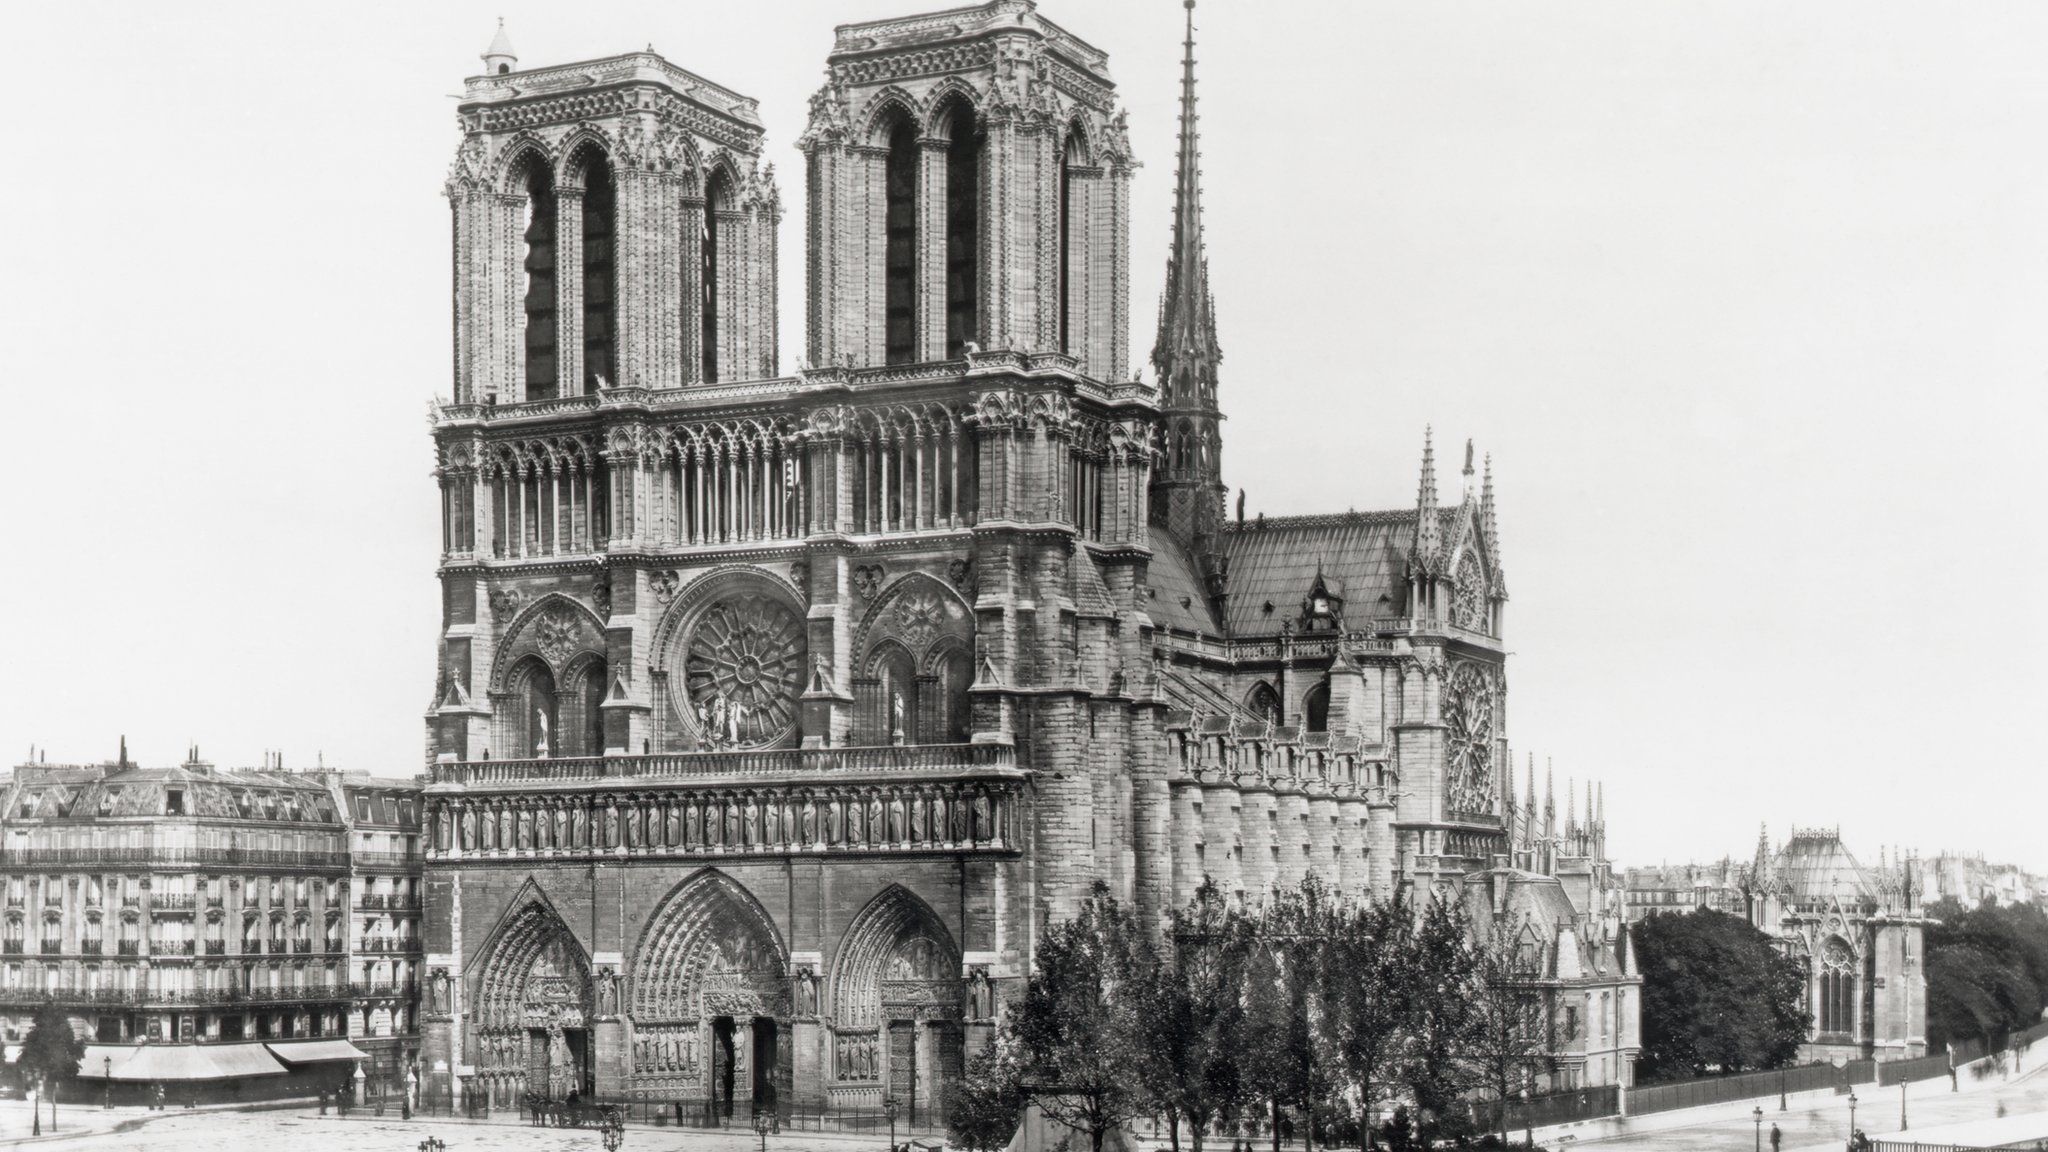 Notre-Dame in 1900